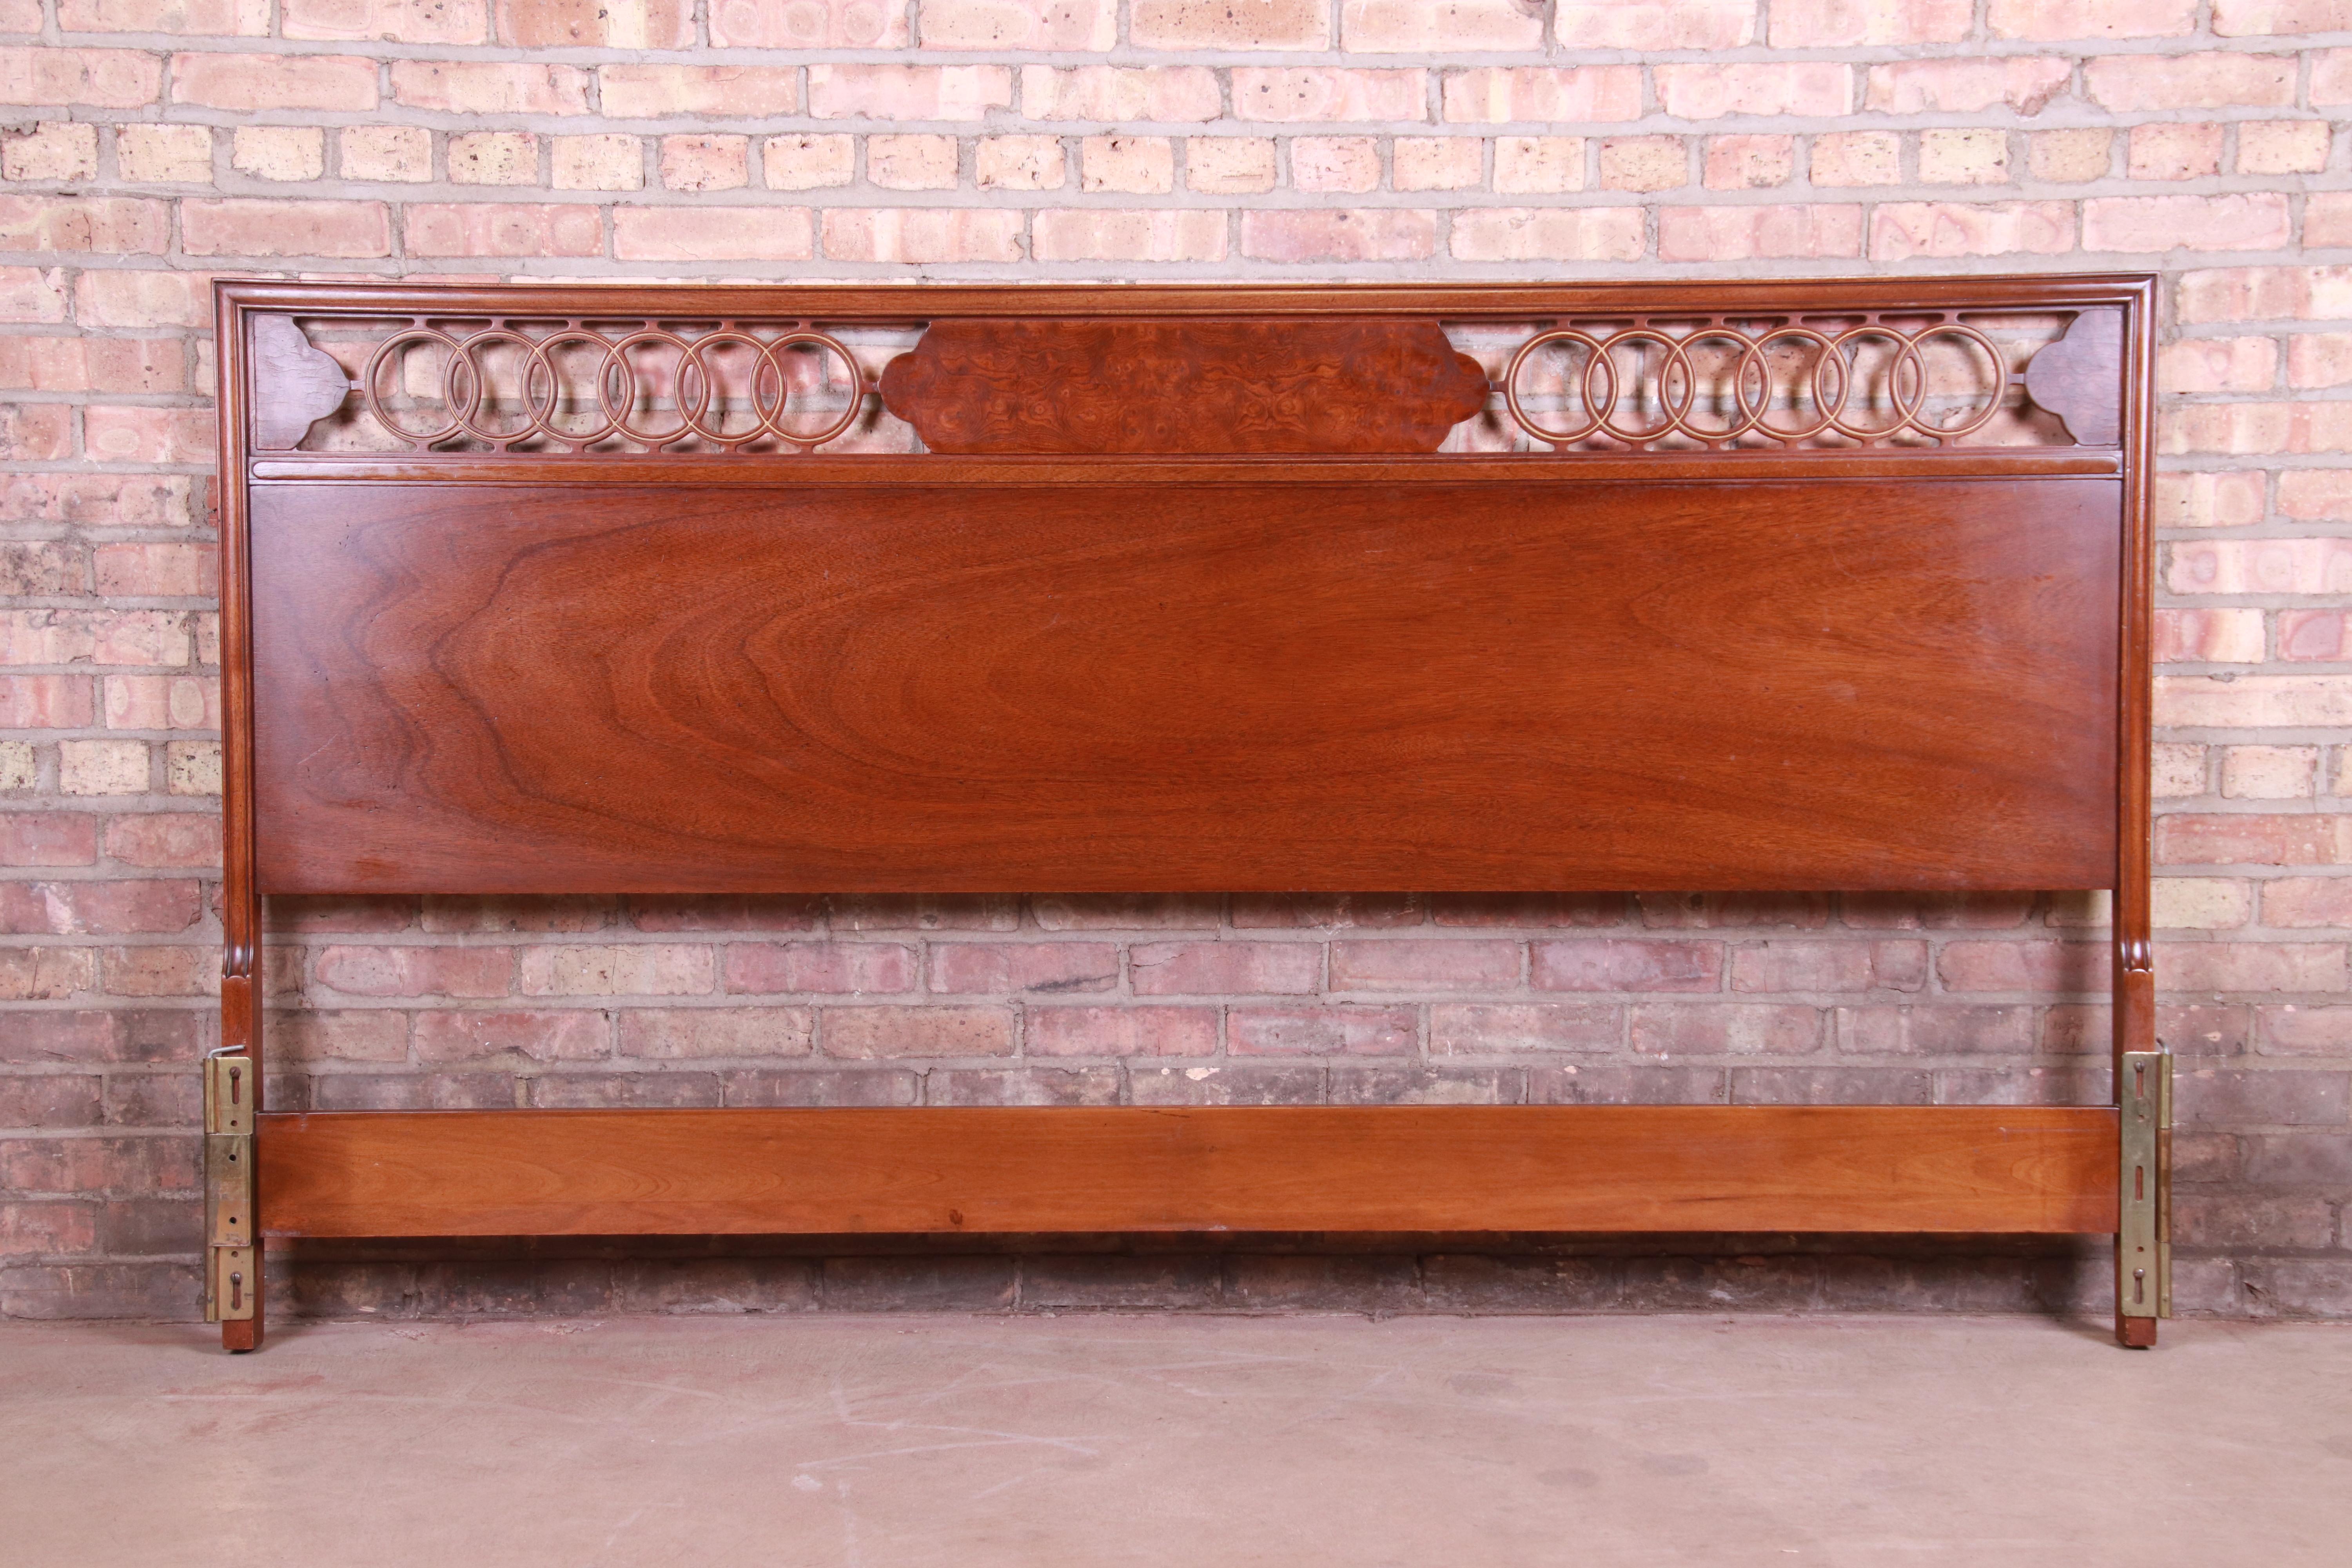 A gorgeous Mid-Century Modern Hollywood Regency walnut and burl wood king size headboard

In the manner of Michael Taylor for Baker Furniture

USA, circa 1960s

Measures: 77.25